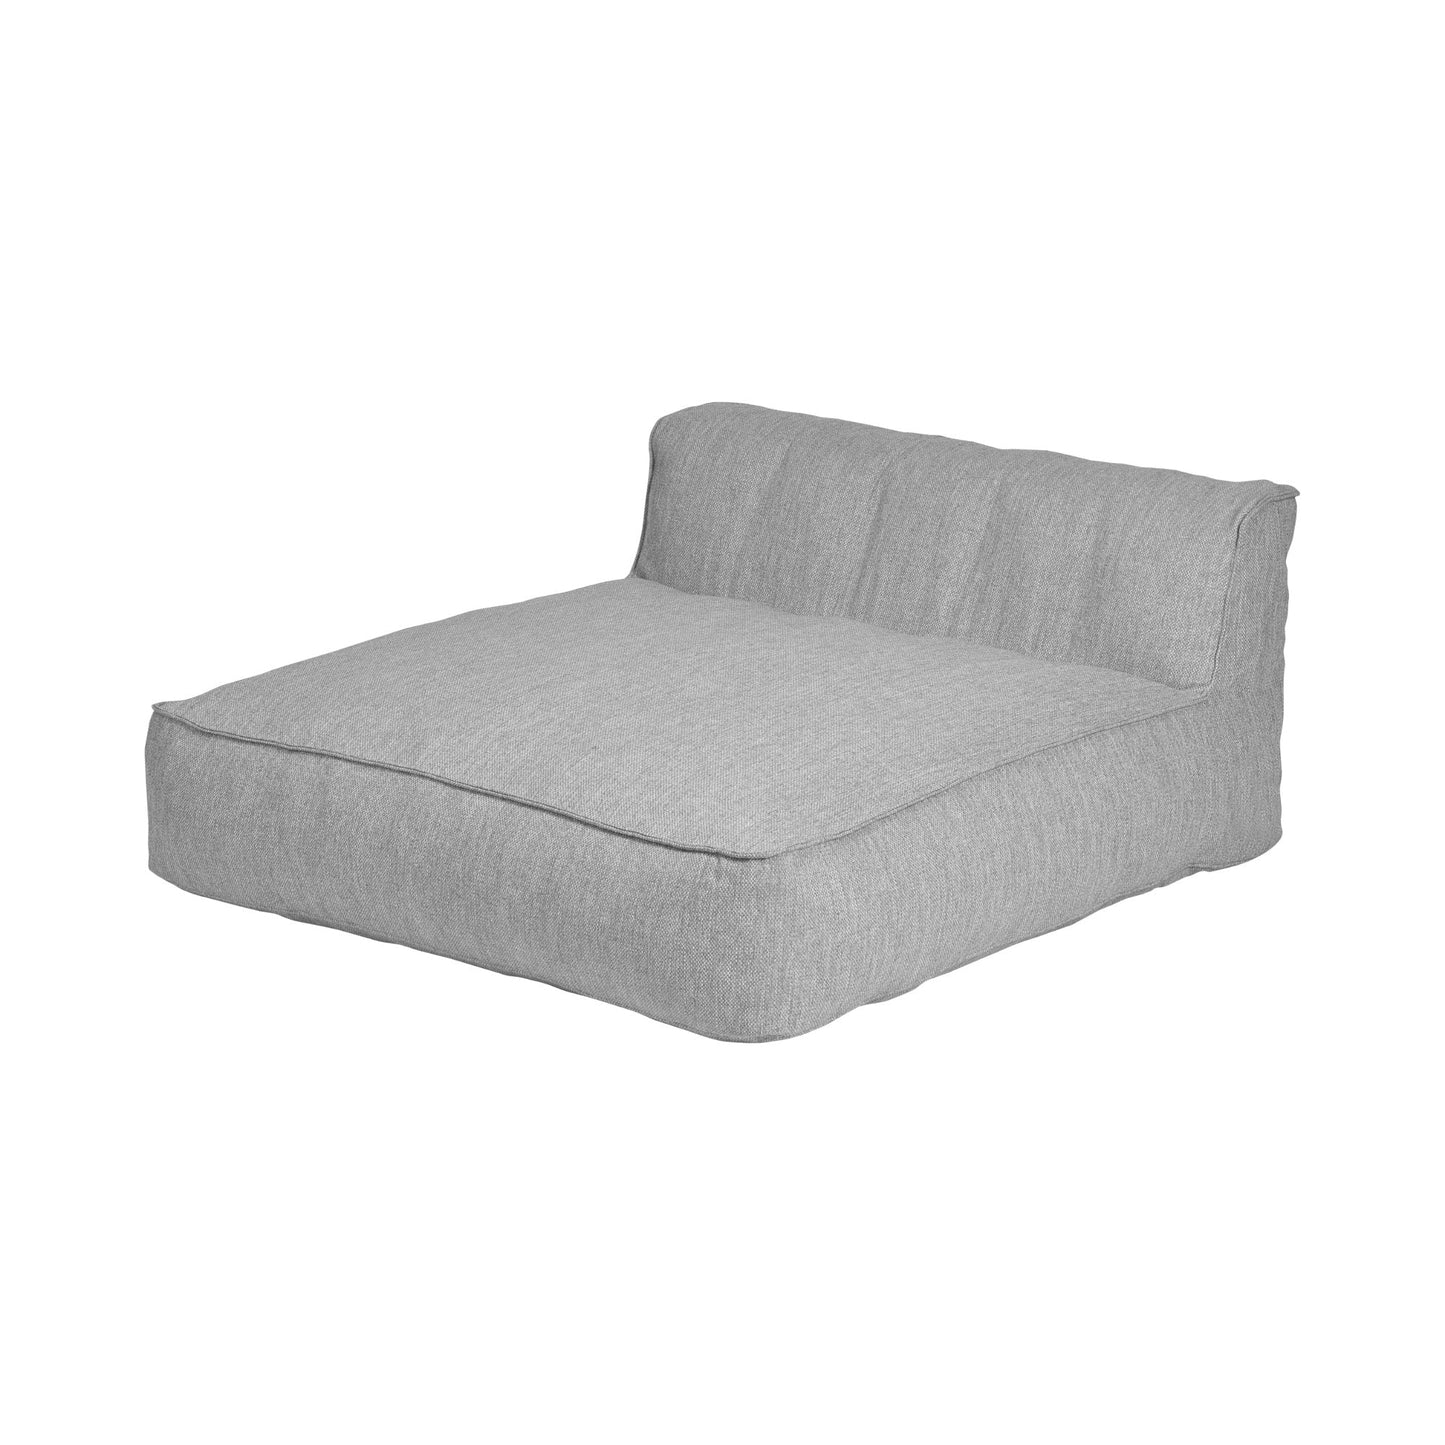 GROW Double Chaise Sectional Outdoor Patio Lounger